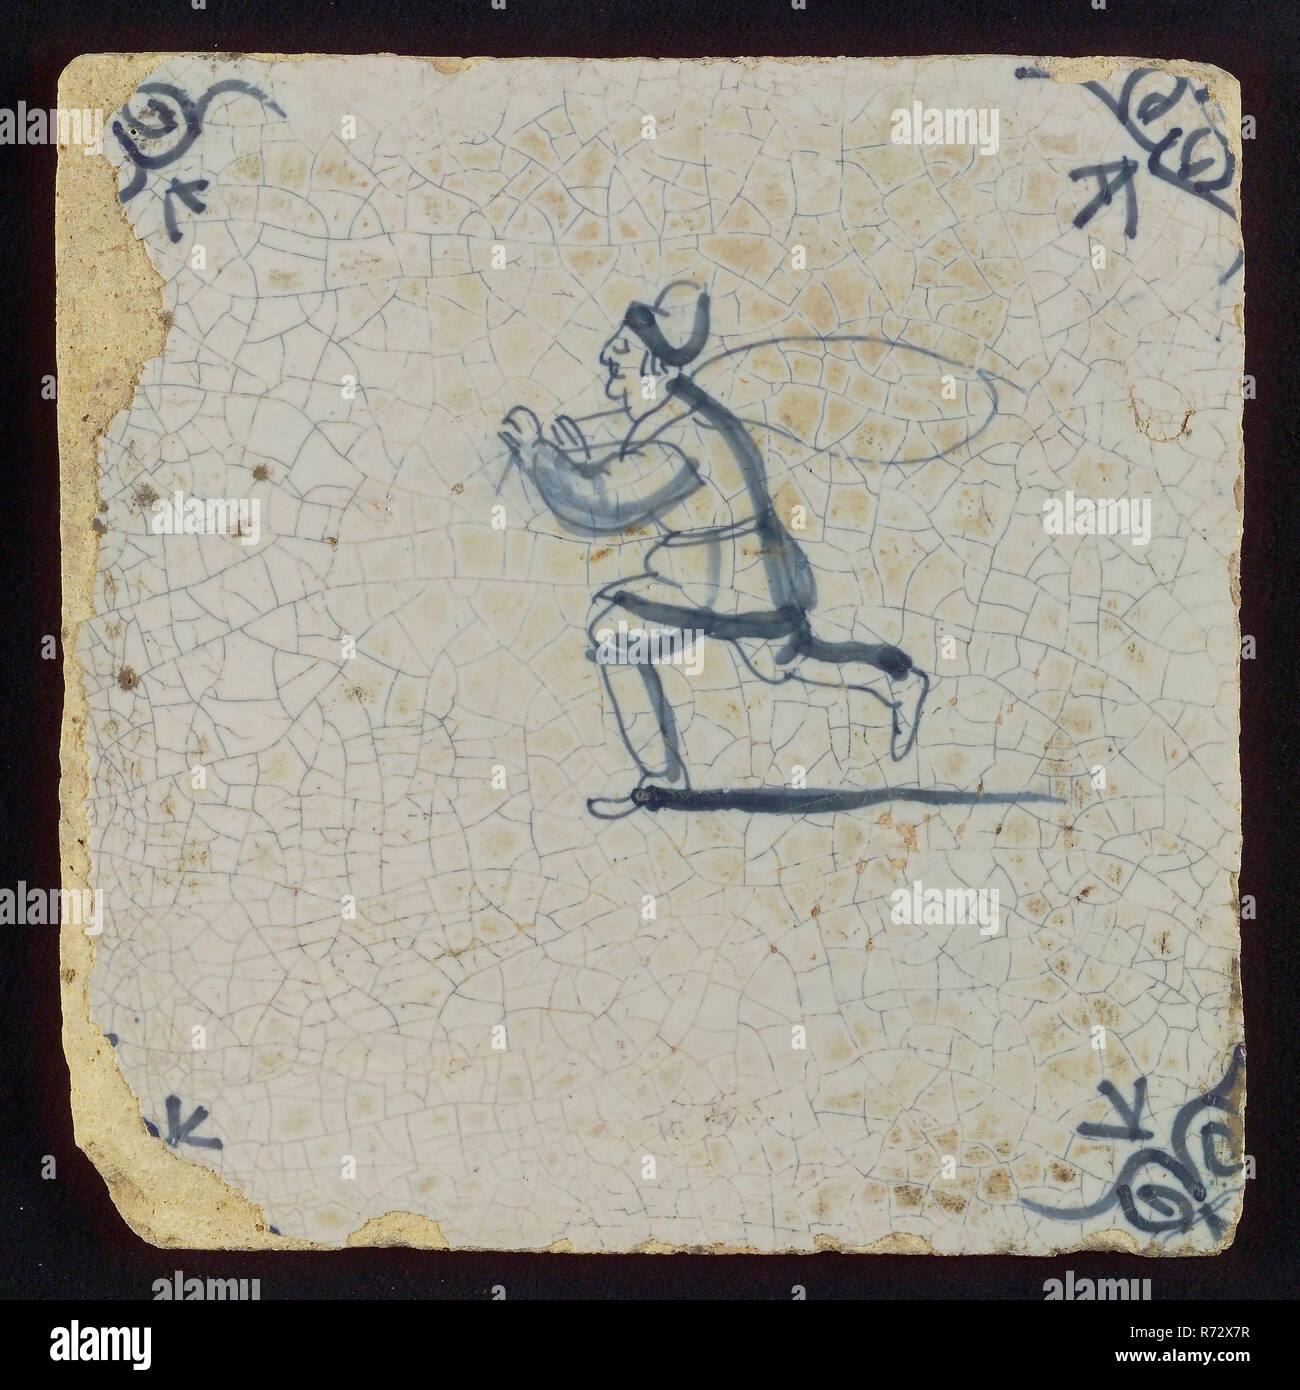 Scene tile, child's play, jump rope, corner motif ox's head, wall tile tile sculpture ceramic earthenware glaze, baked 2x glazed painted Blue on white jumping rope Stock Photo